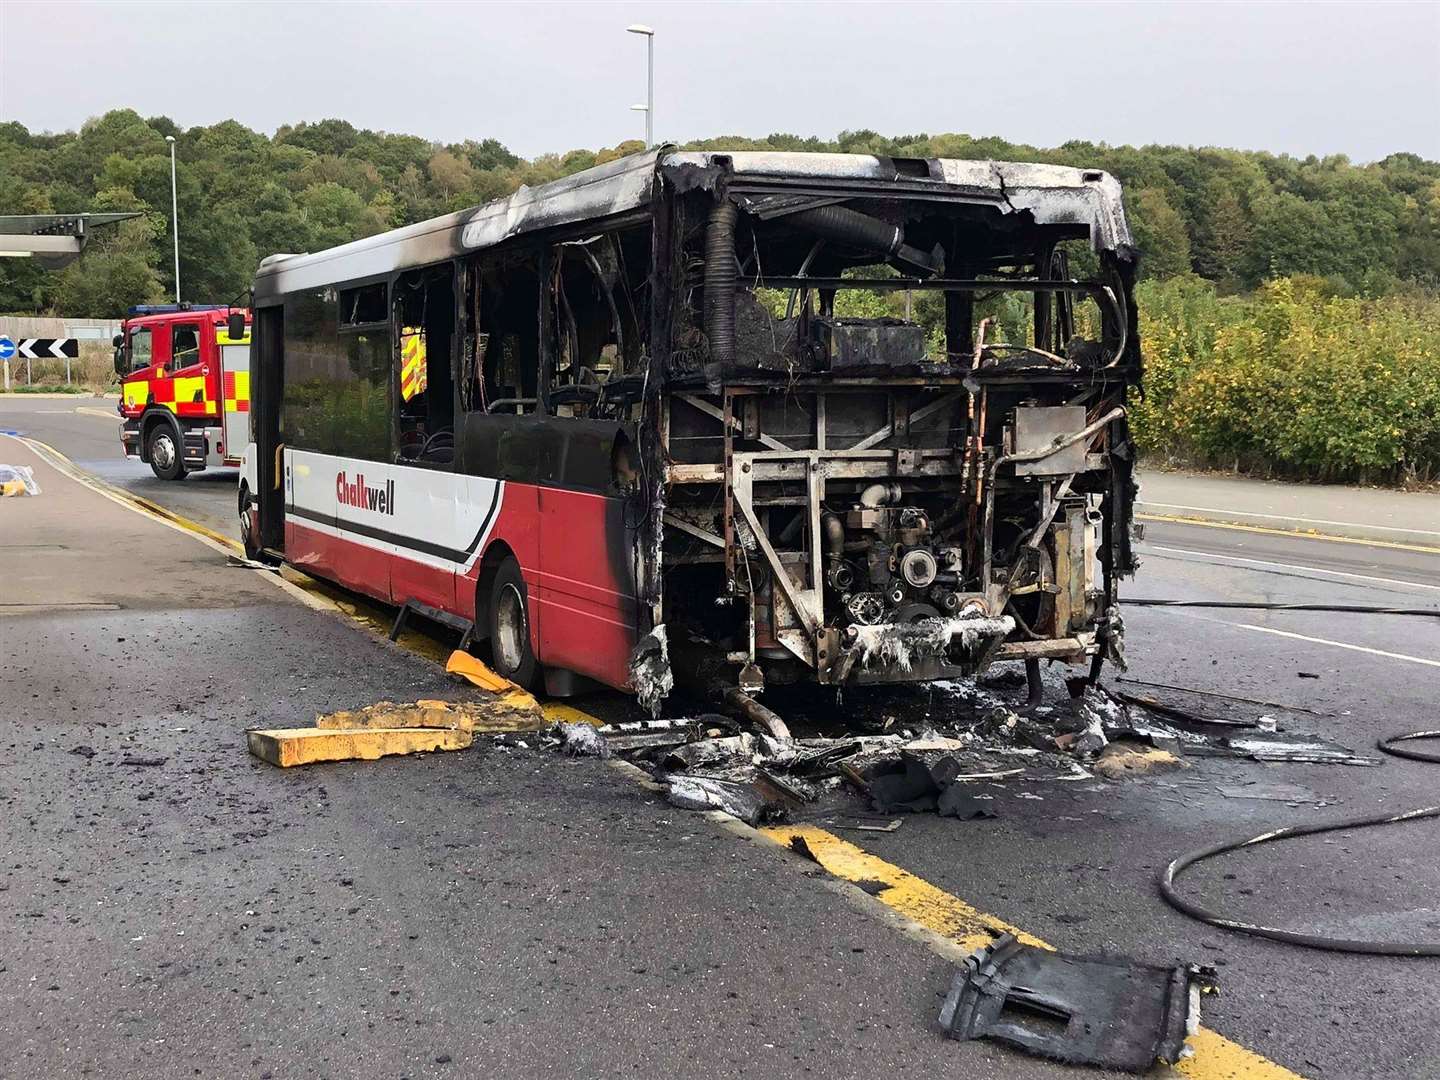 The burnt-out bus